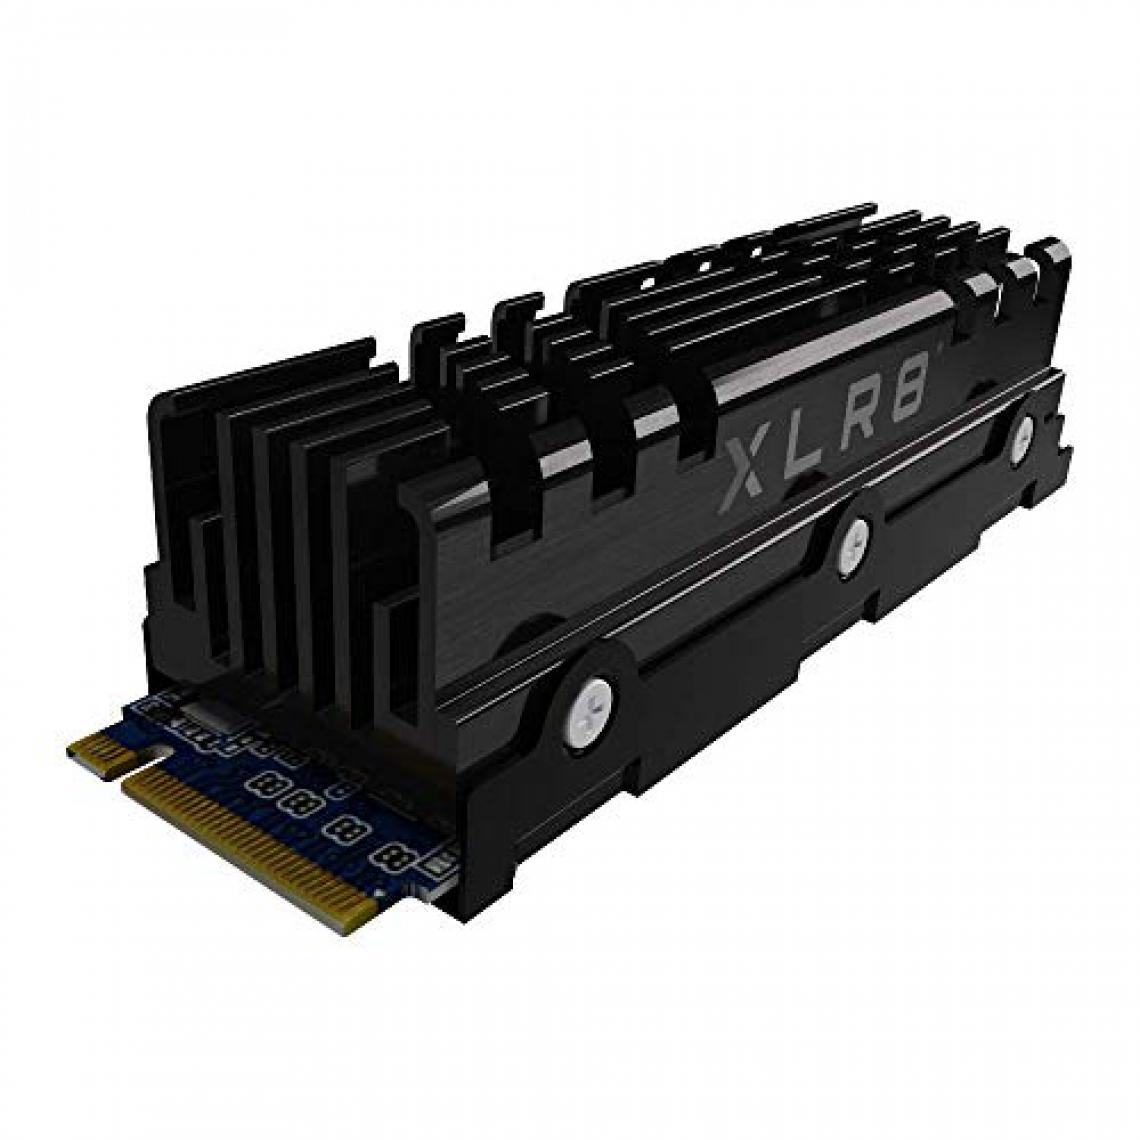 PNY - XLR8 CS3040 1To M.2 NVMe SSD XLR8 CS3040 1To M.2 NVMe 4xGen4 Internal Solid State Drive With Heatsink - SSD Interne